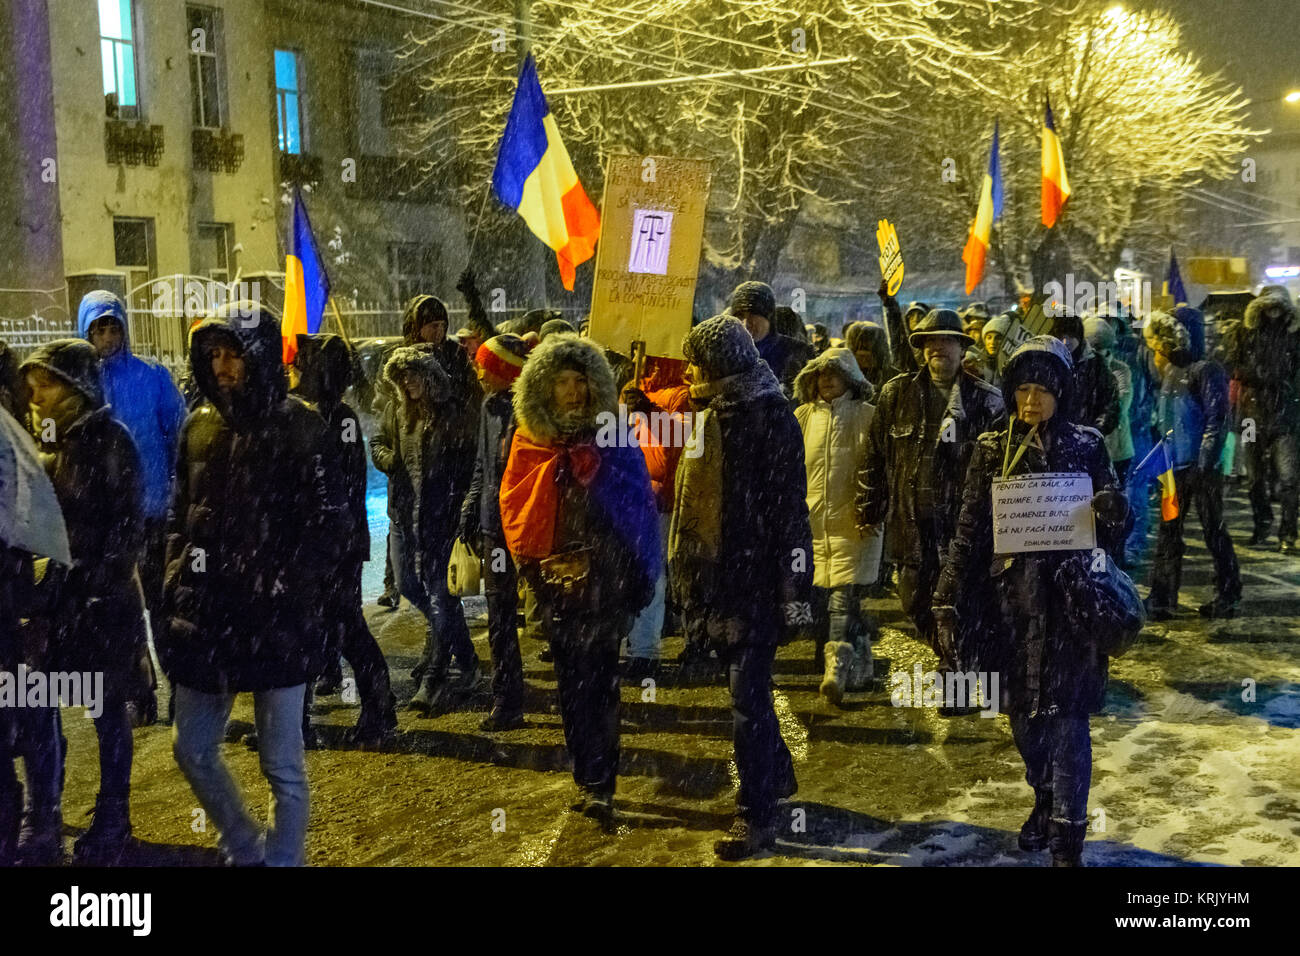 Brasov, Romania - December 17, 2017: Thousands of Romanians protesting against governing coalition and its plans to change the rules of Justice. Stock Photo